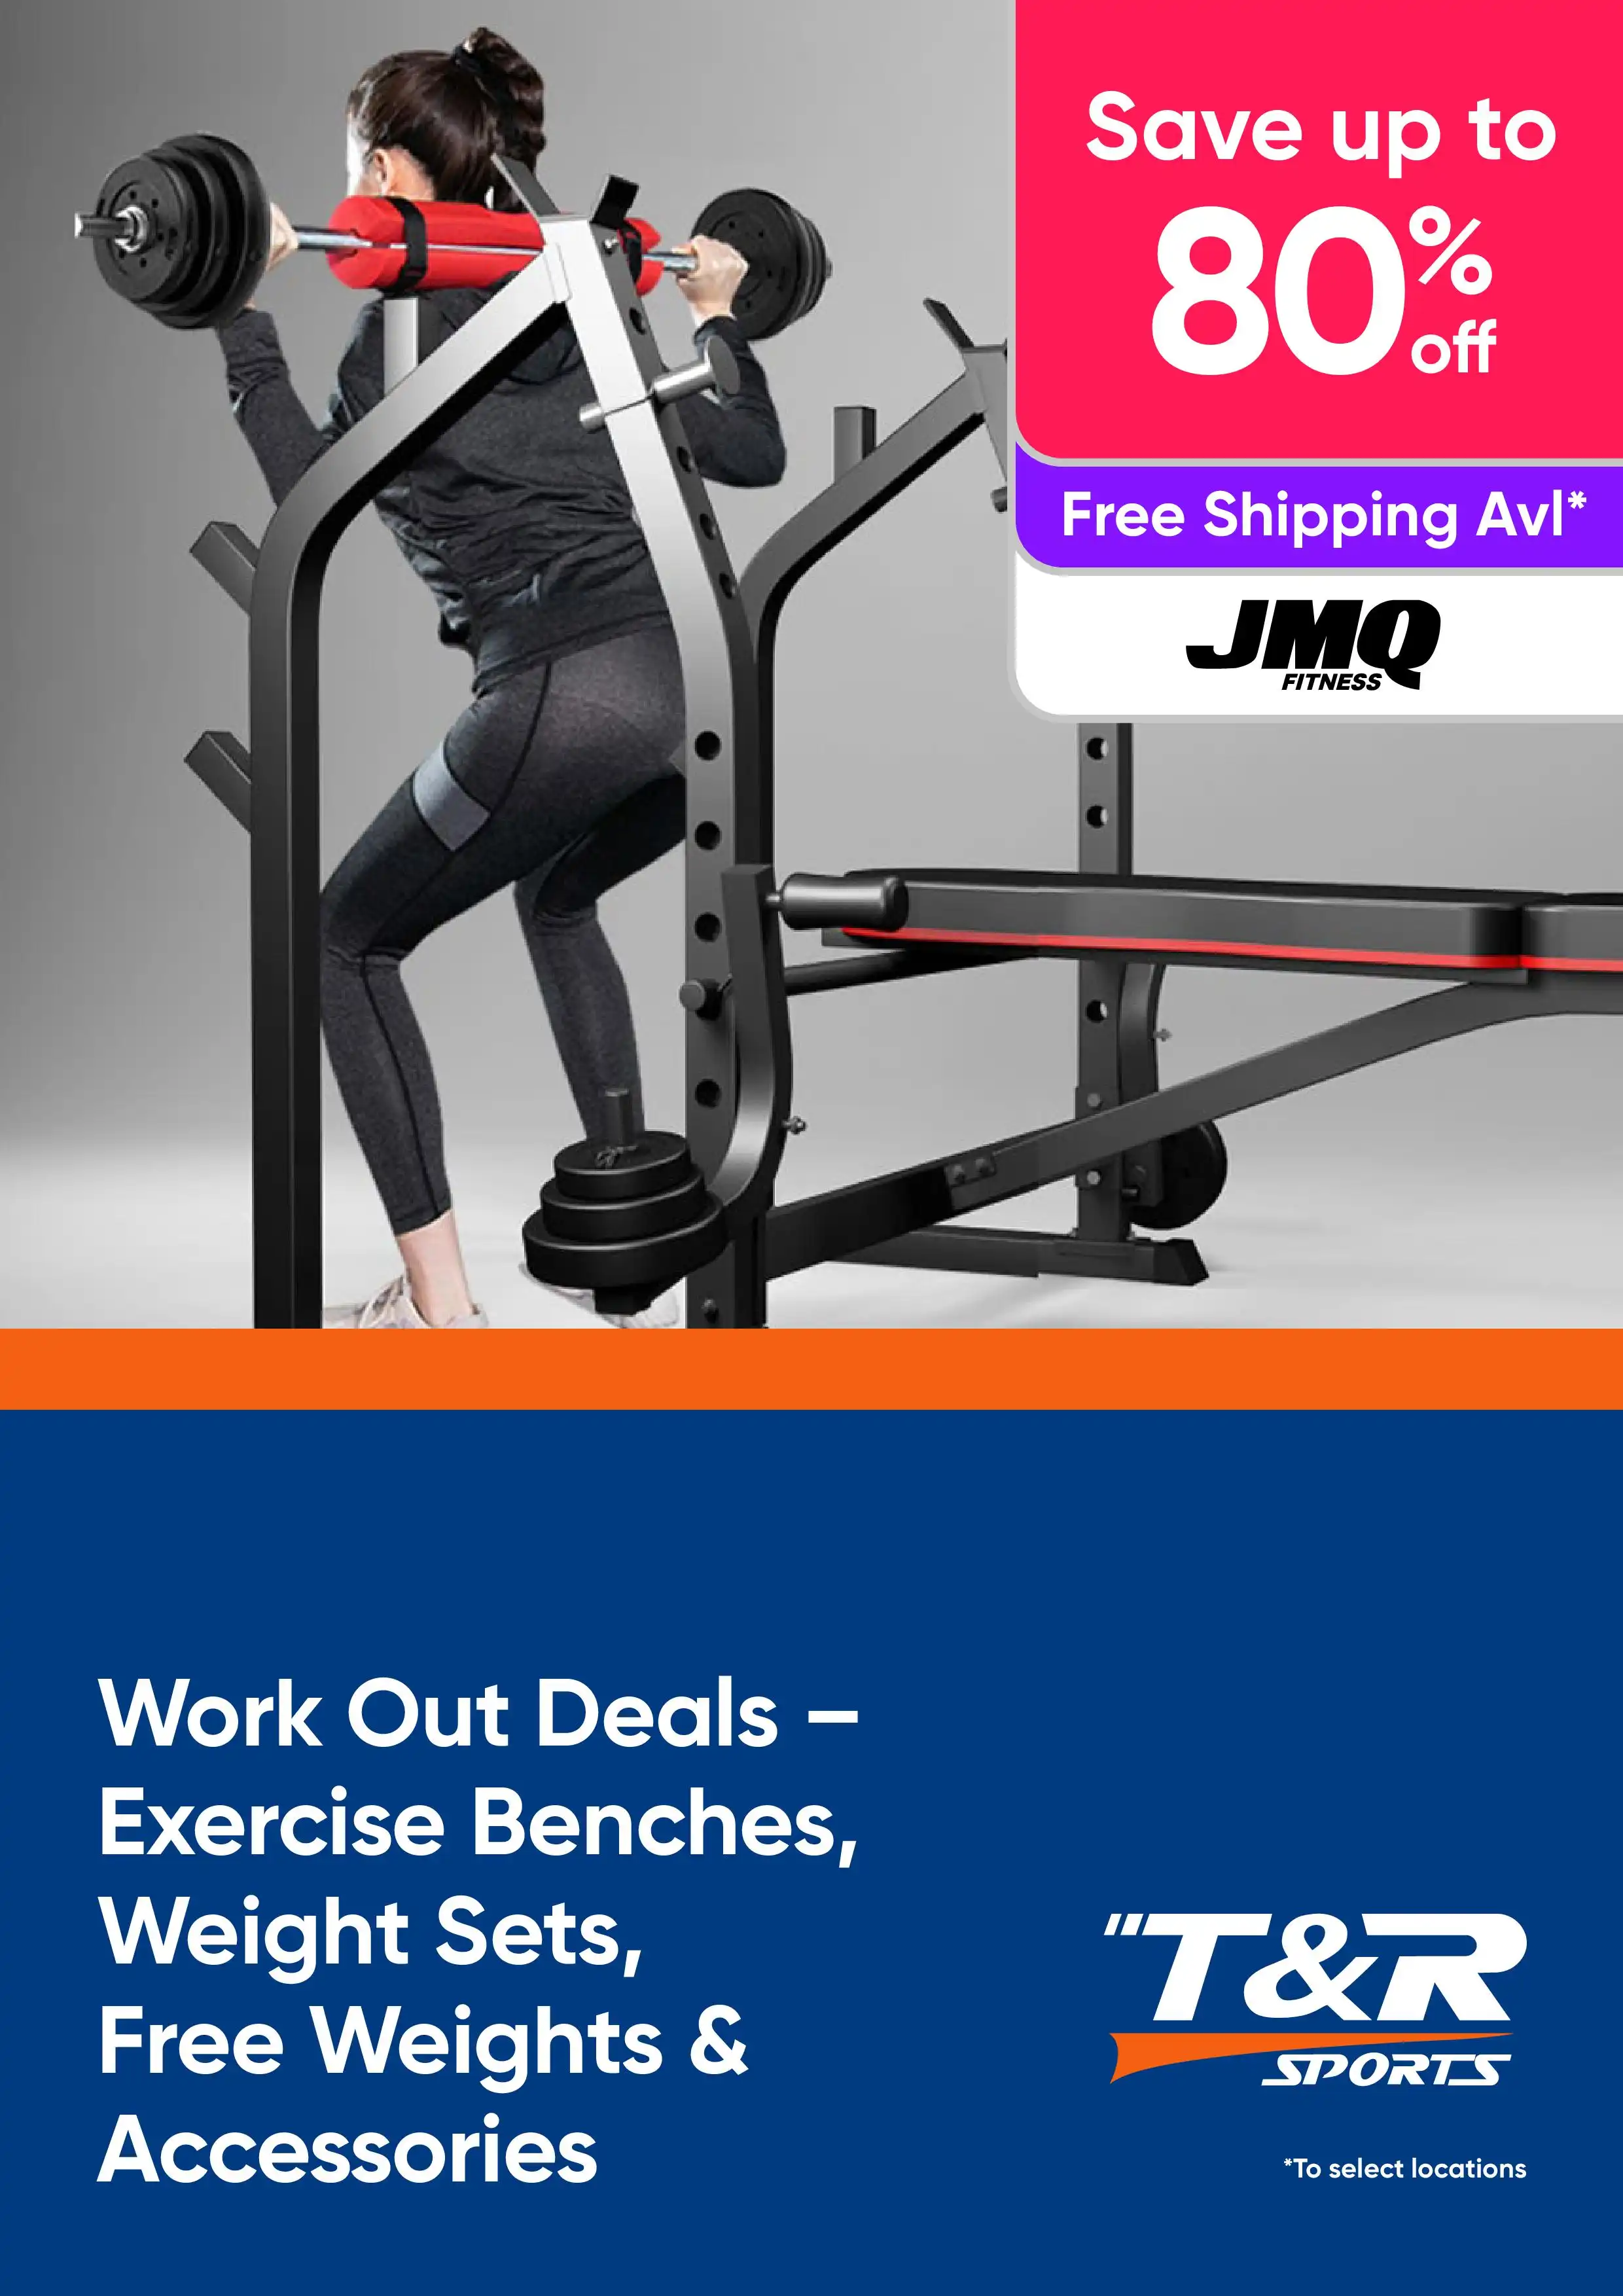 Work Out Deals - Up to 80% Off Exercise Benches, Weight Sets, Free Weights and Accessories